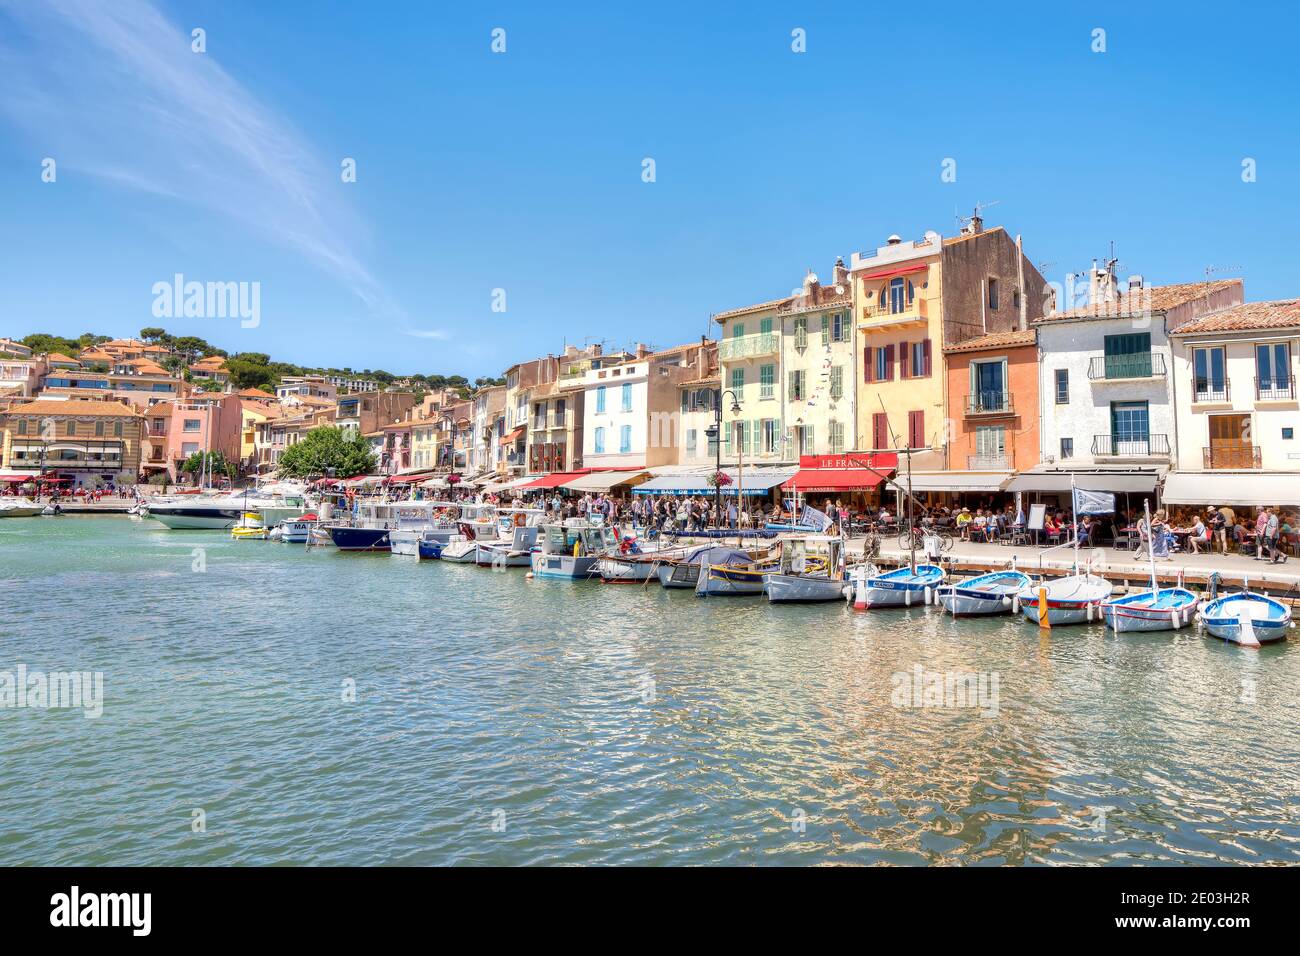 Boats moored in front of the restaurants and stores on the Cassis, Provence, France waterfront Stock Photo